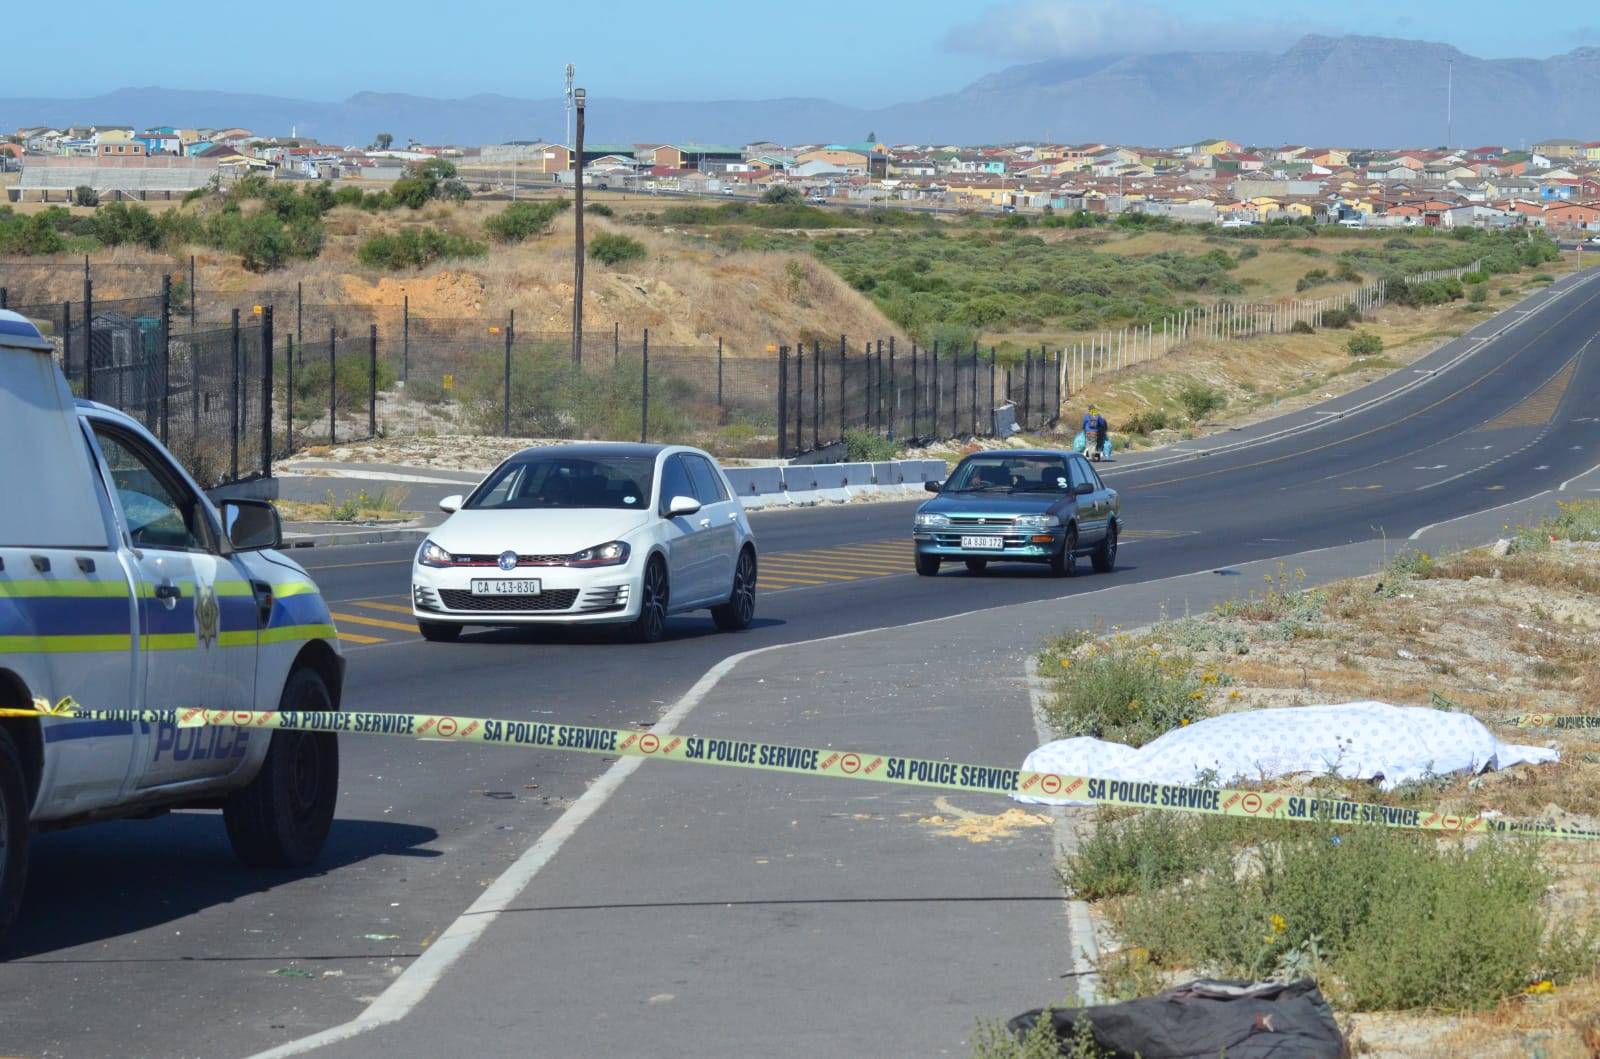 Lingelethu-West police are investigating a murder case after the body of an unidentified man was found on 30-01-2022 in Spine Road, on the side of the road in Khayelitsha, Cape Town..Photo by Lulekwa Mbadamane